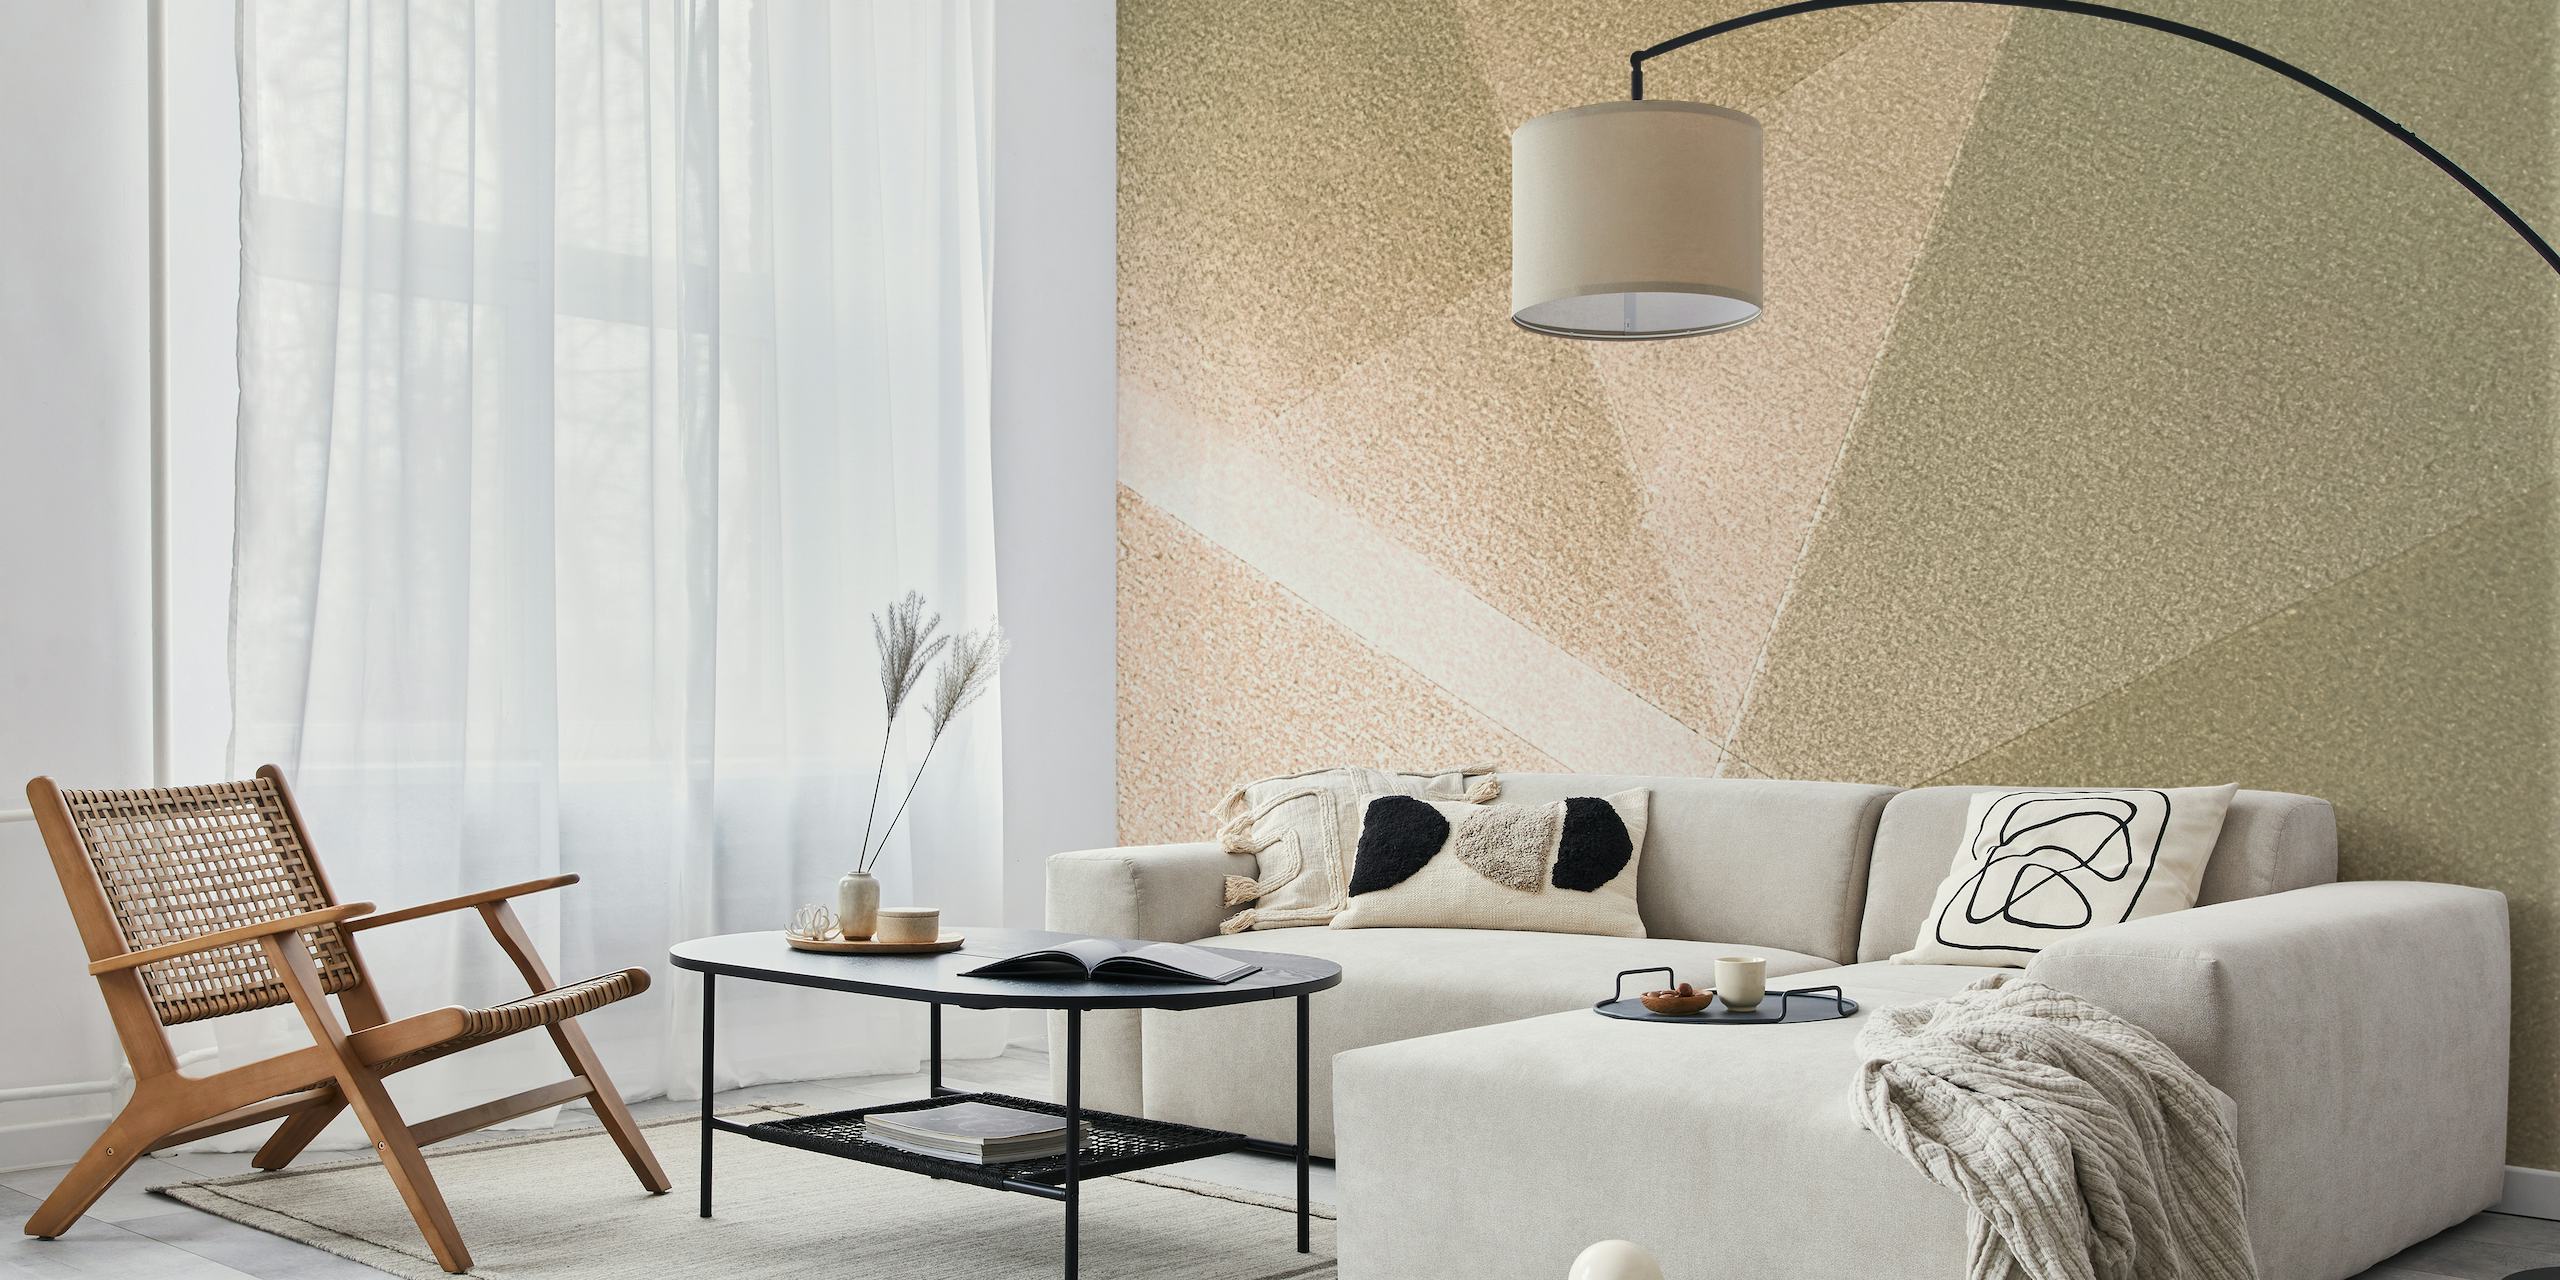 Geometric pattern wall mural in shades of beige and gold creating a subtle light and shadow effect